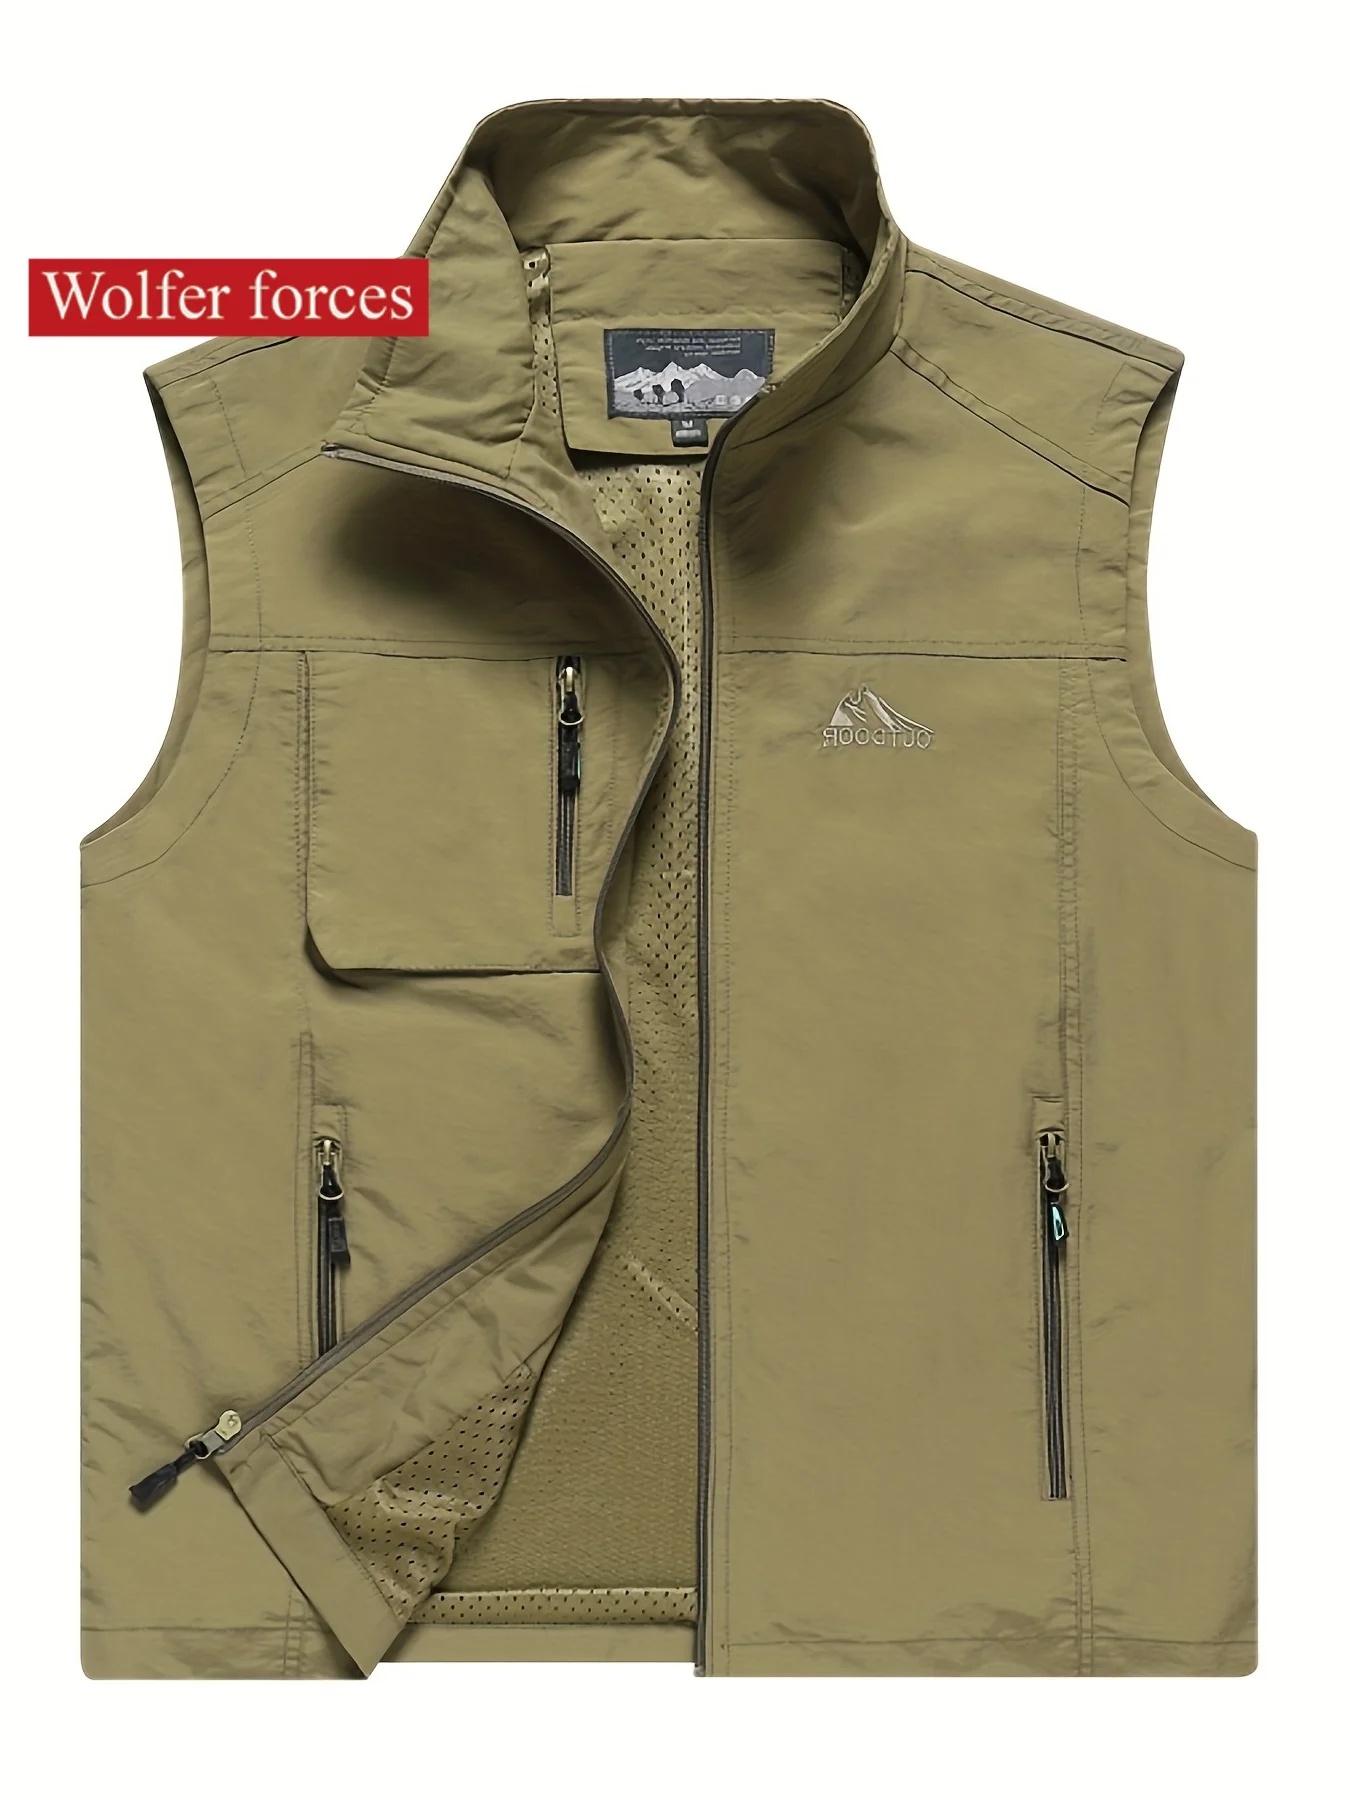 Photography Vests of Men Fishing Vest Camping Sweatshirts Men's Clothing Fishing Wear Waterproof Luxury Fashionable Casual dvotinst women photography props off shoulder maternity dresses elegant pregnancy dress for photoshoot studio shooting clothing